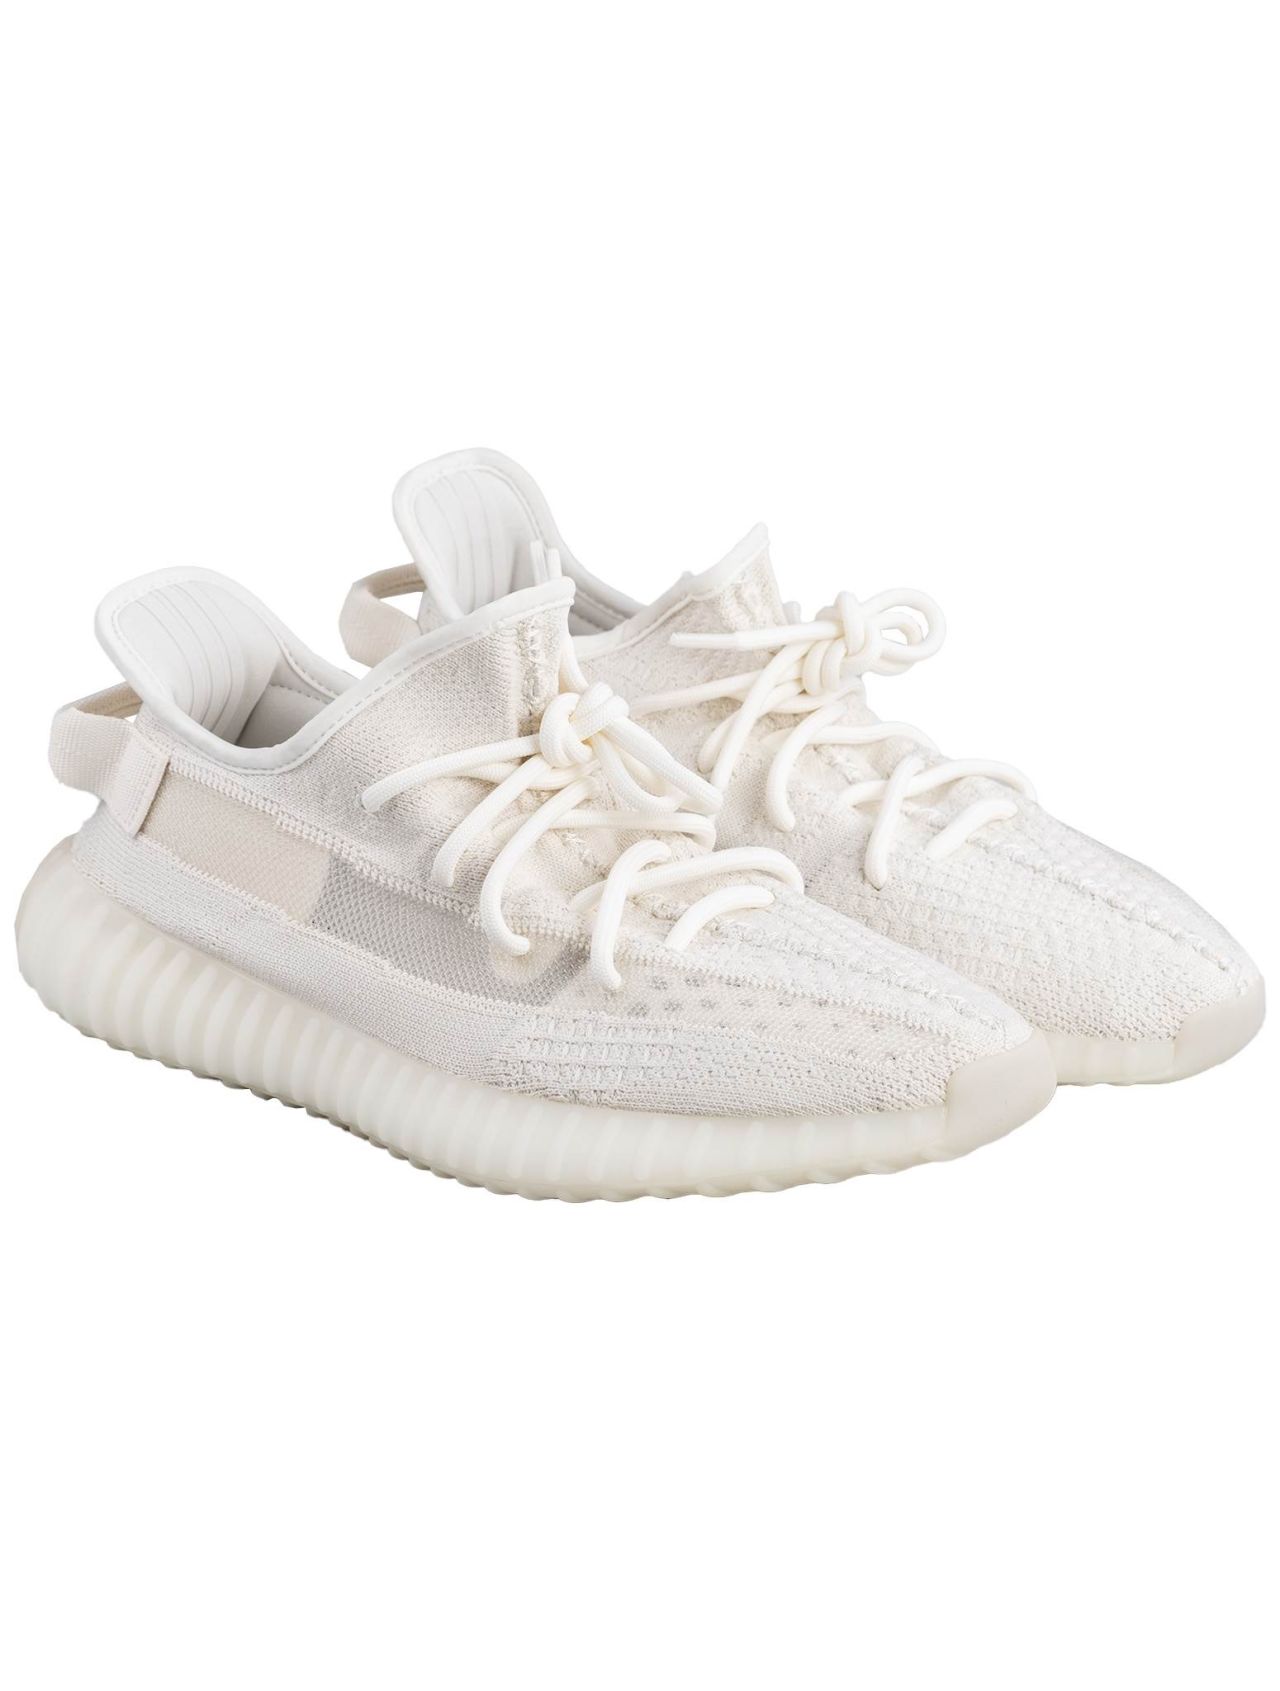 Sneakers and shoes adidas Yeezy Yeezy Boost 350